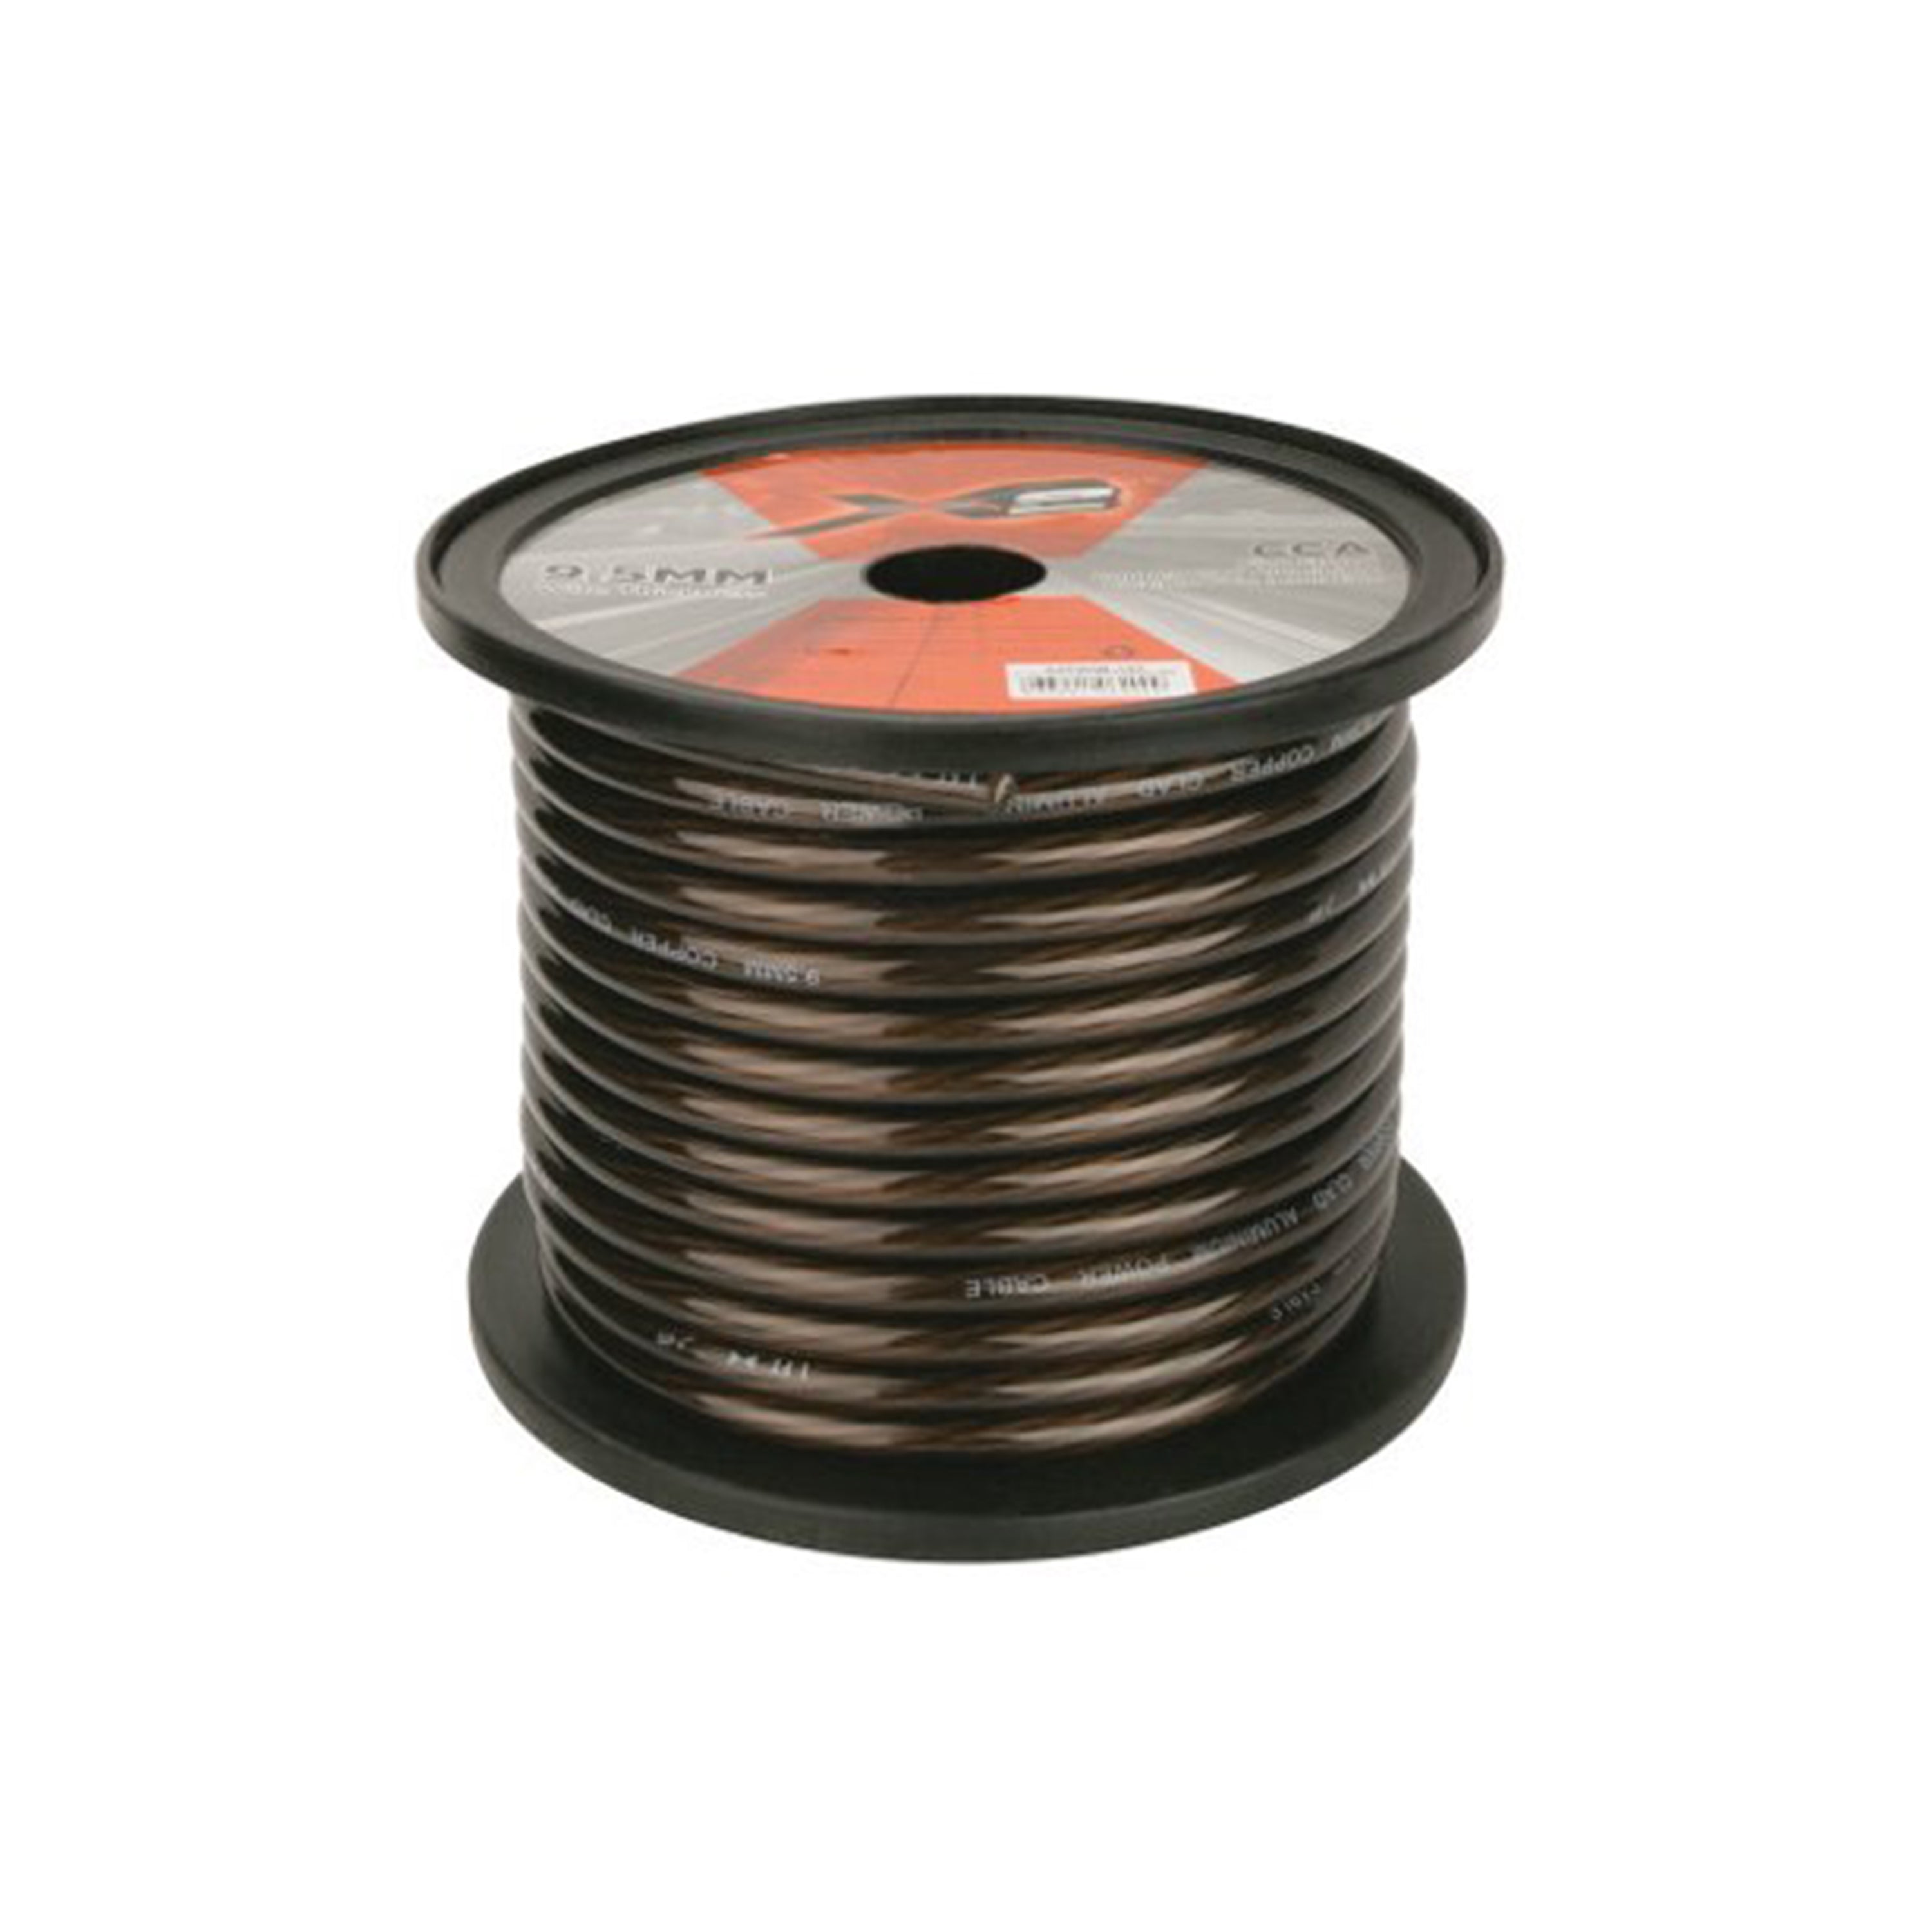 X2 by Scosche X2P65R-200, 6.5mm Red Power Wire Spool - 200 Ft.